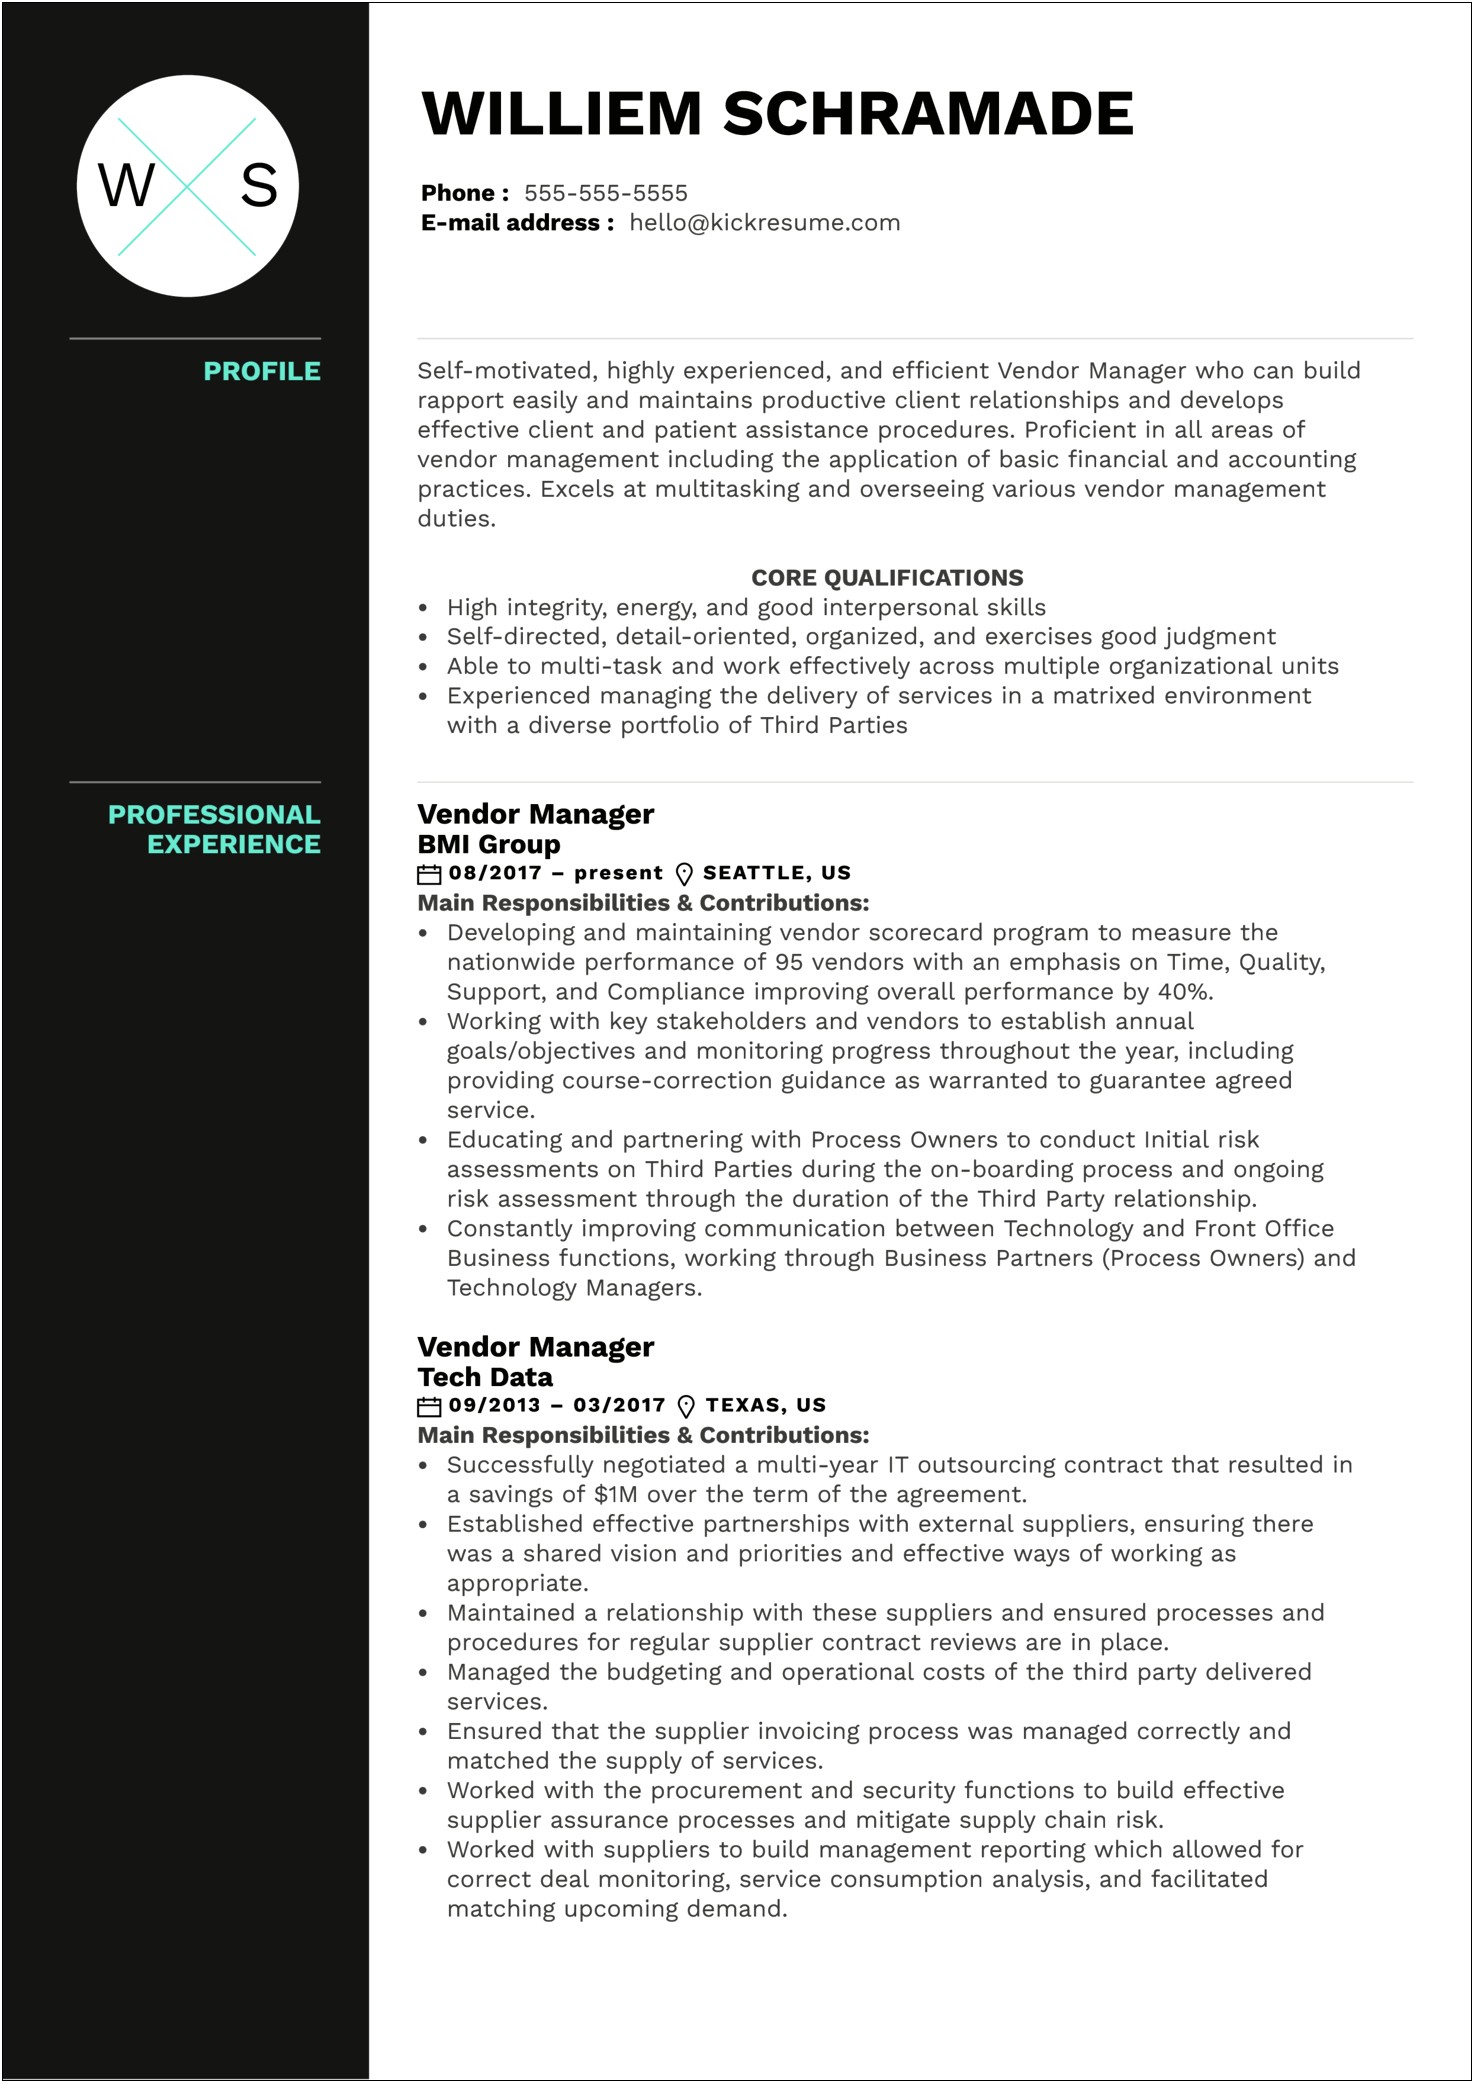 Resume Greared Towards Relationship Management